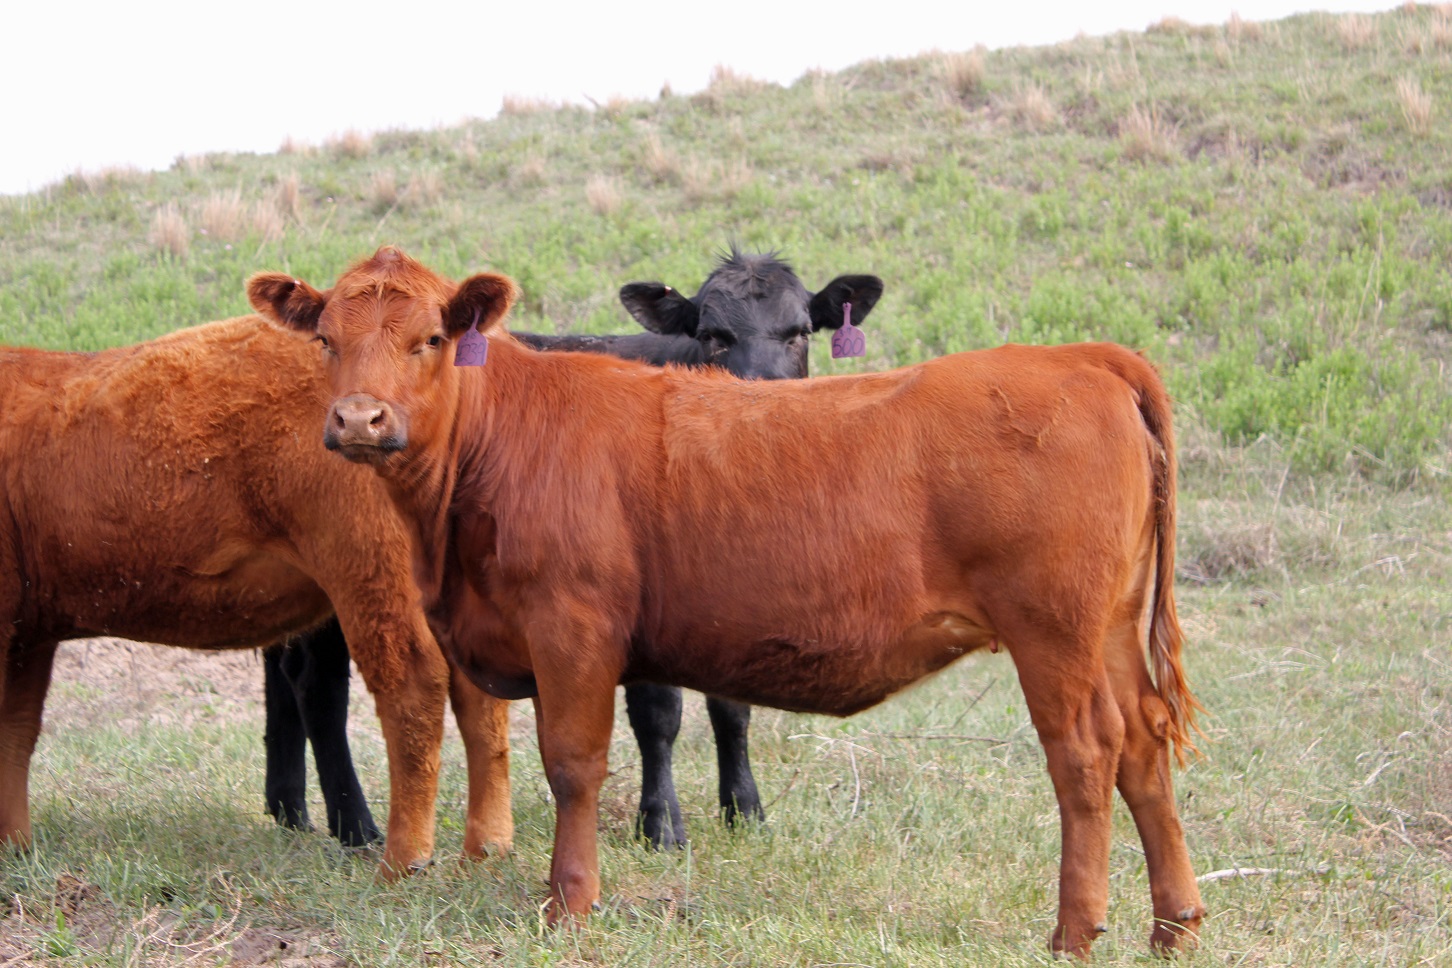 Replacement heifers